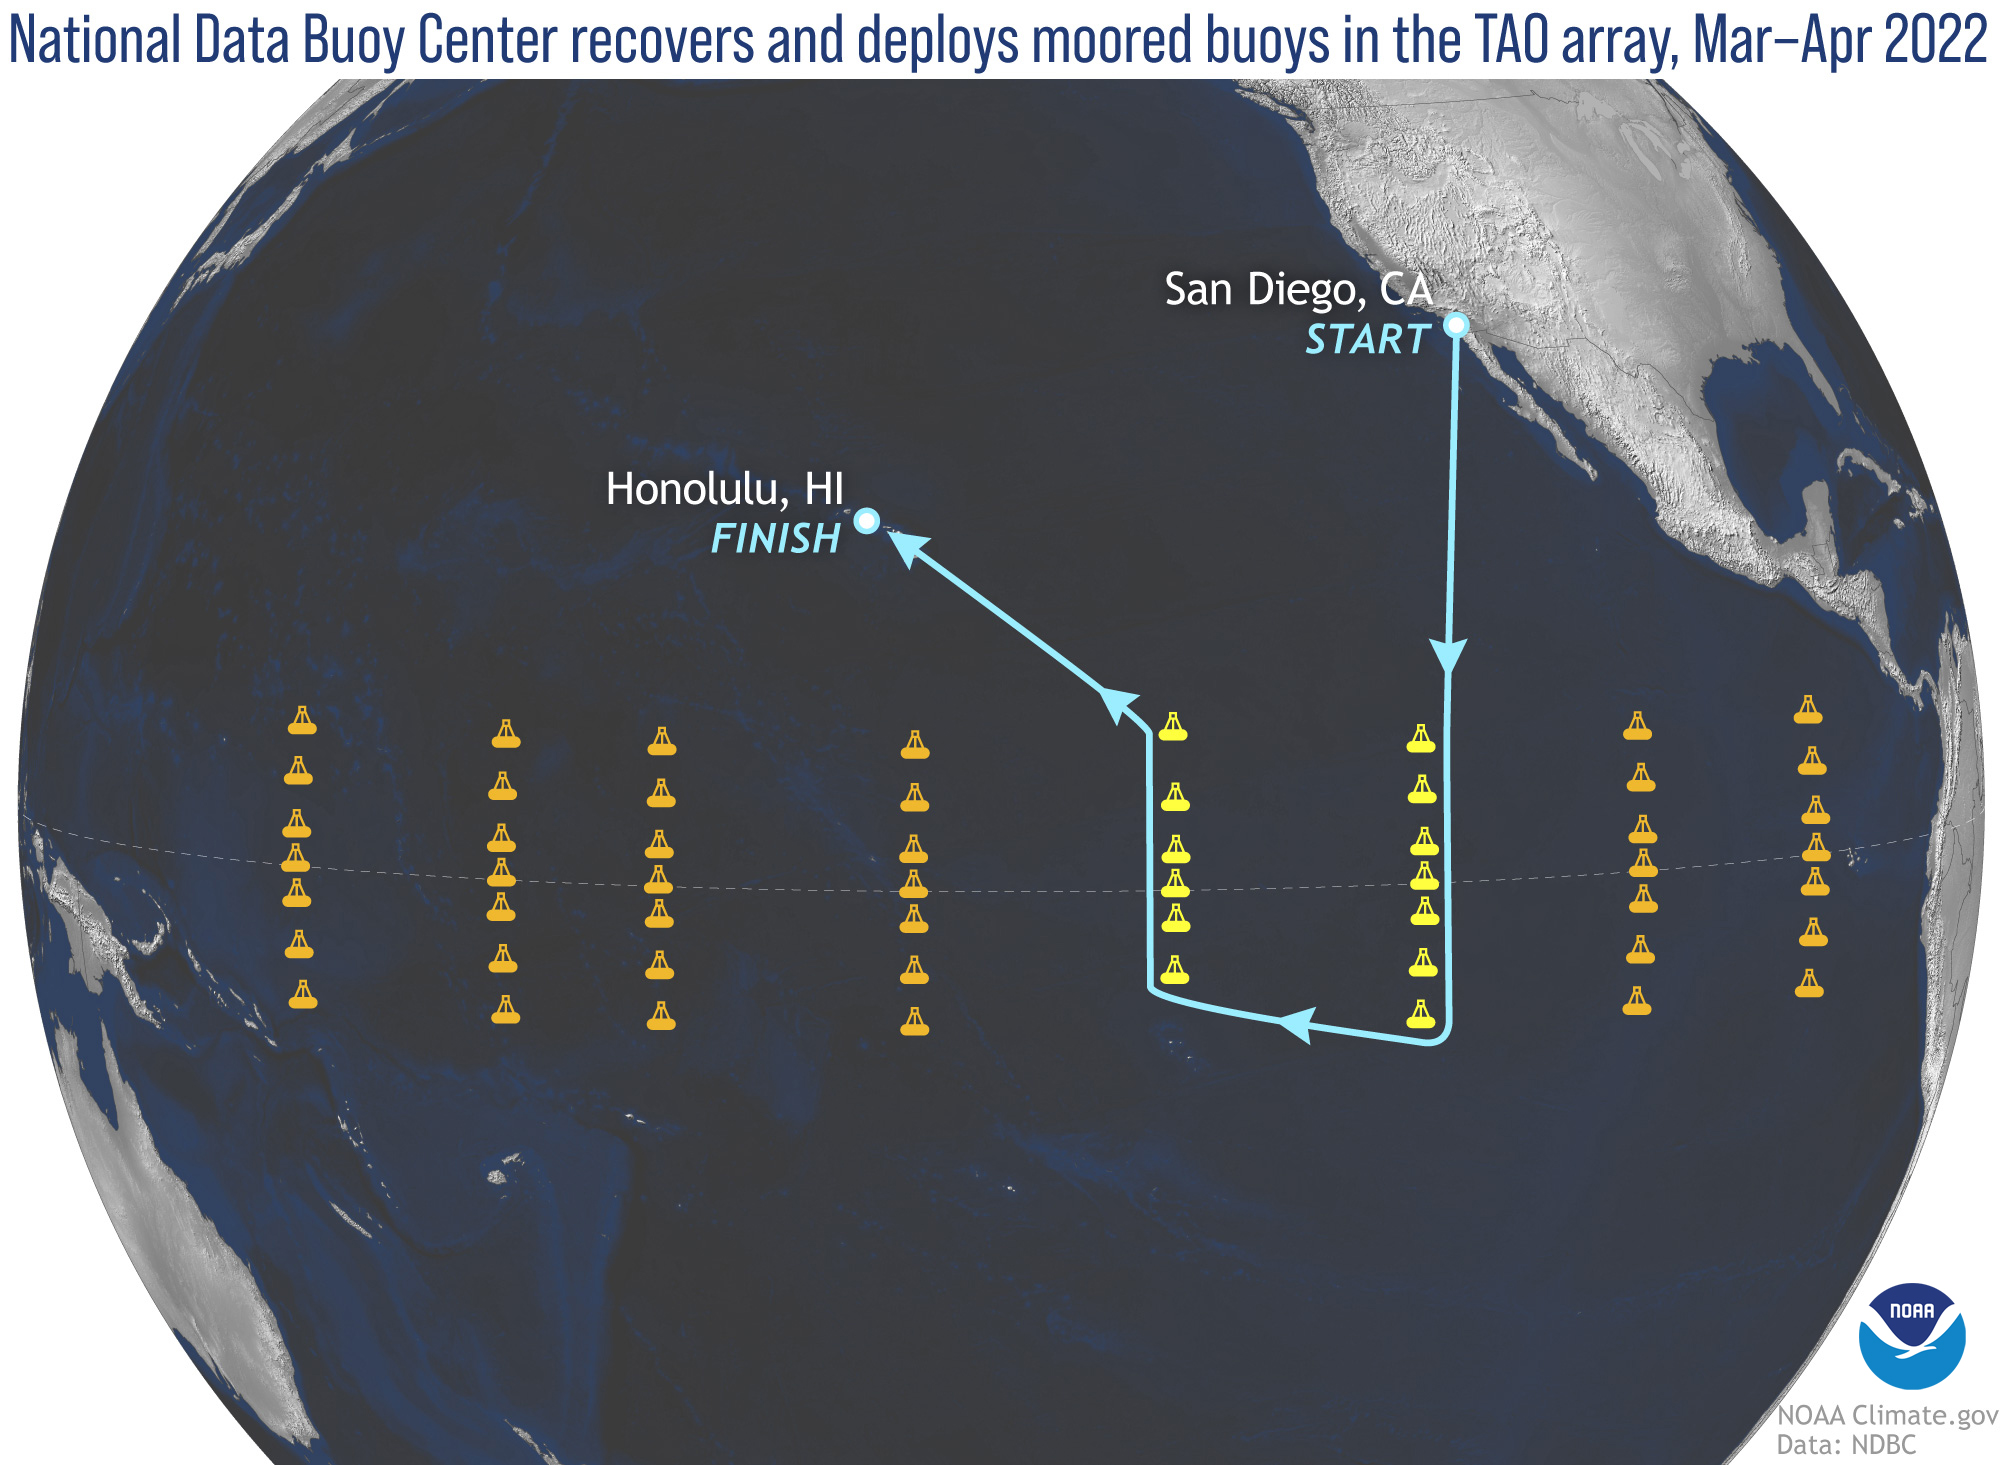 The first leg of the National Data Buoy Center 2022 mission began March 4. Buoy technicians sailed from San Diego, California, to the Tropical Atmosphere Ocean (TAO) moored buoy array in the equatorial Pacific Ocean basin. While there technicians serviced 13 buoys, two of the eight TAO lines. This one-of-a-kind buoy array helps scientists detect, better understand and predict climate variations related to El Niño and the Southern Oscillation (ENSO), which can influence weather patterns around the world. 